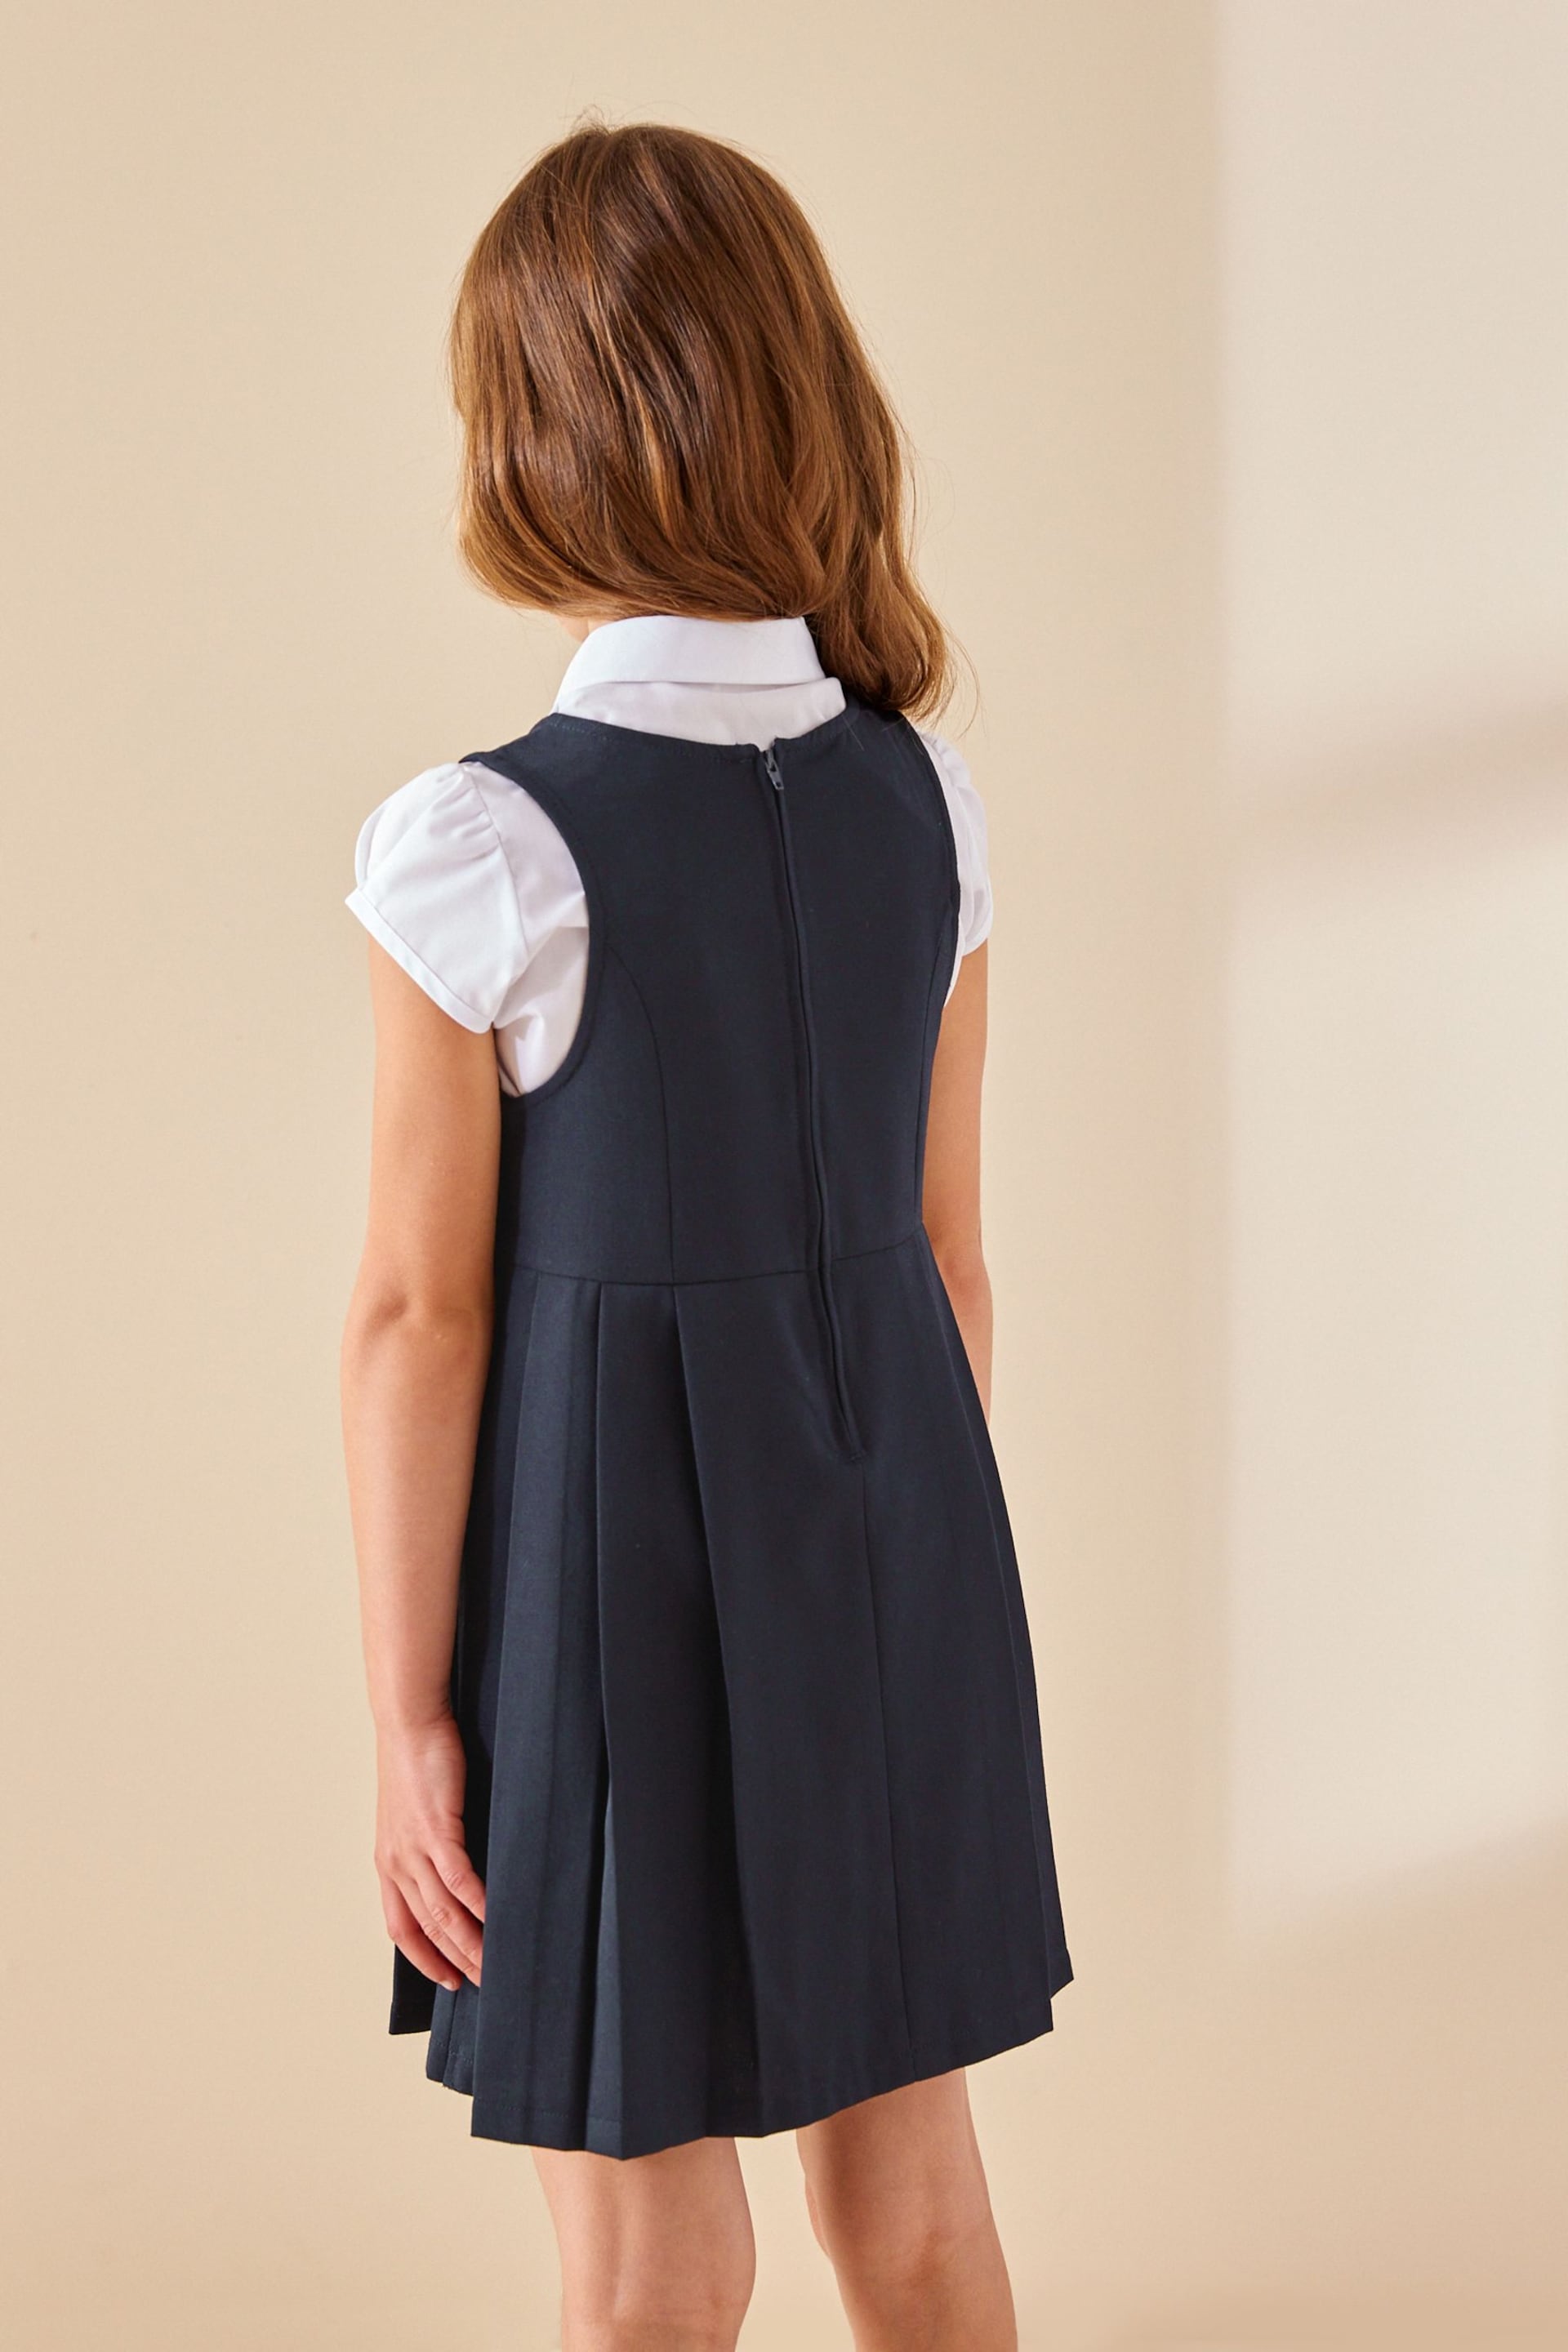 Navy Blue Asymmetric Button Front Pinafore School Dress (3-14yrs) - Image 4 of 6